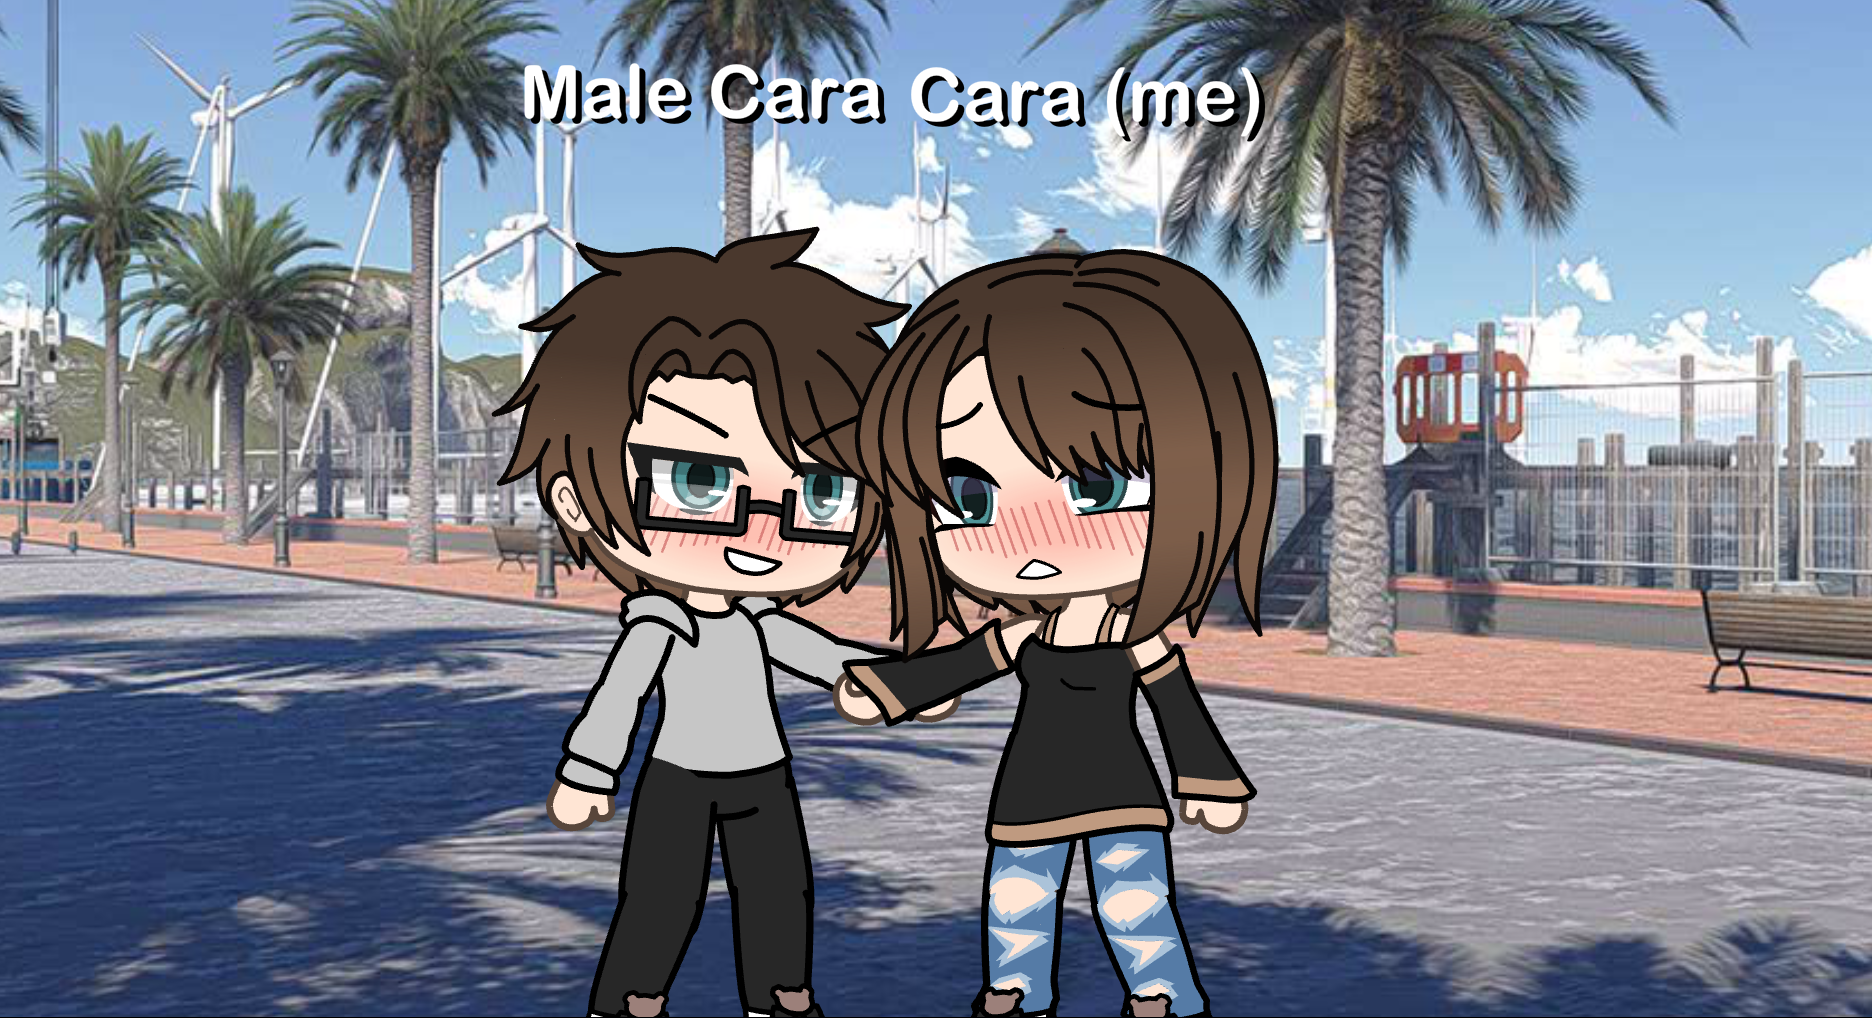 High Quality Male Cara and Cara holding hands meme Blank Meme Template